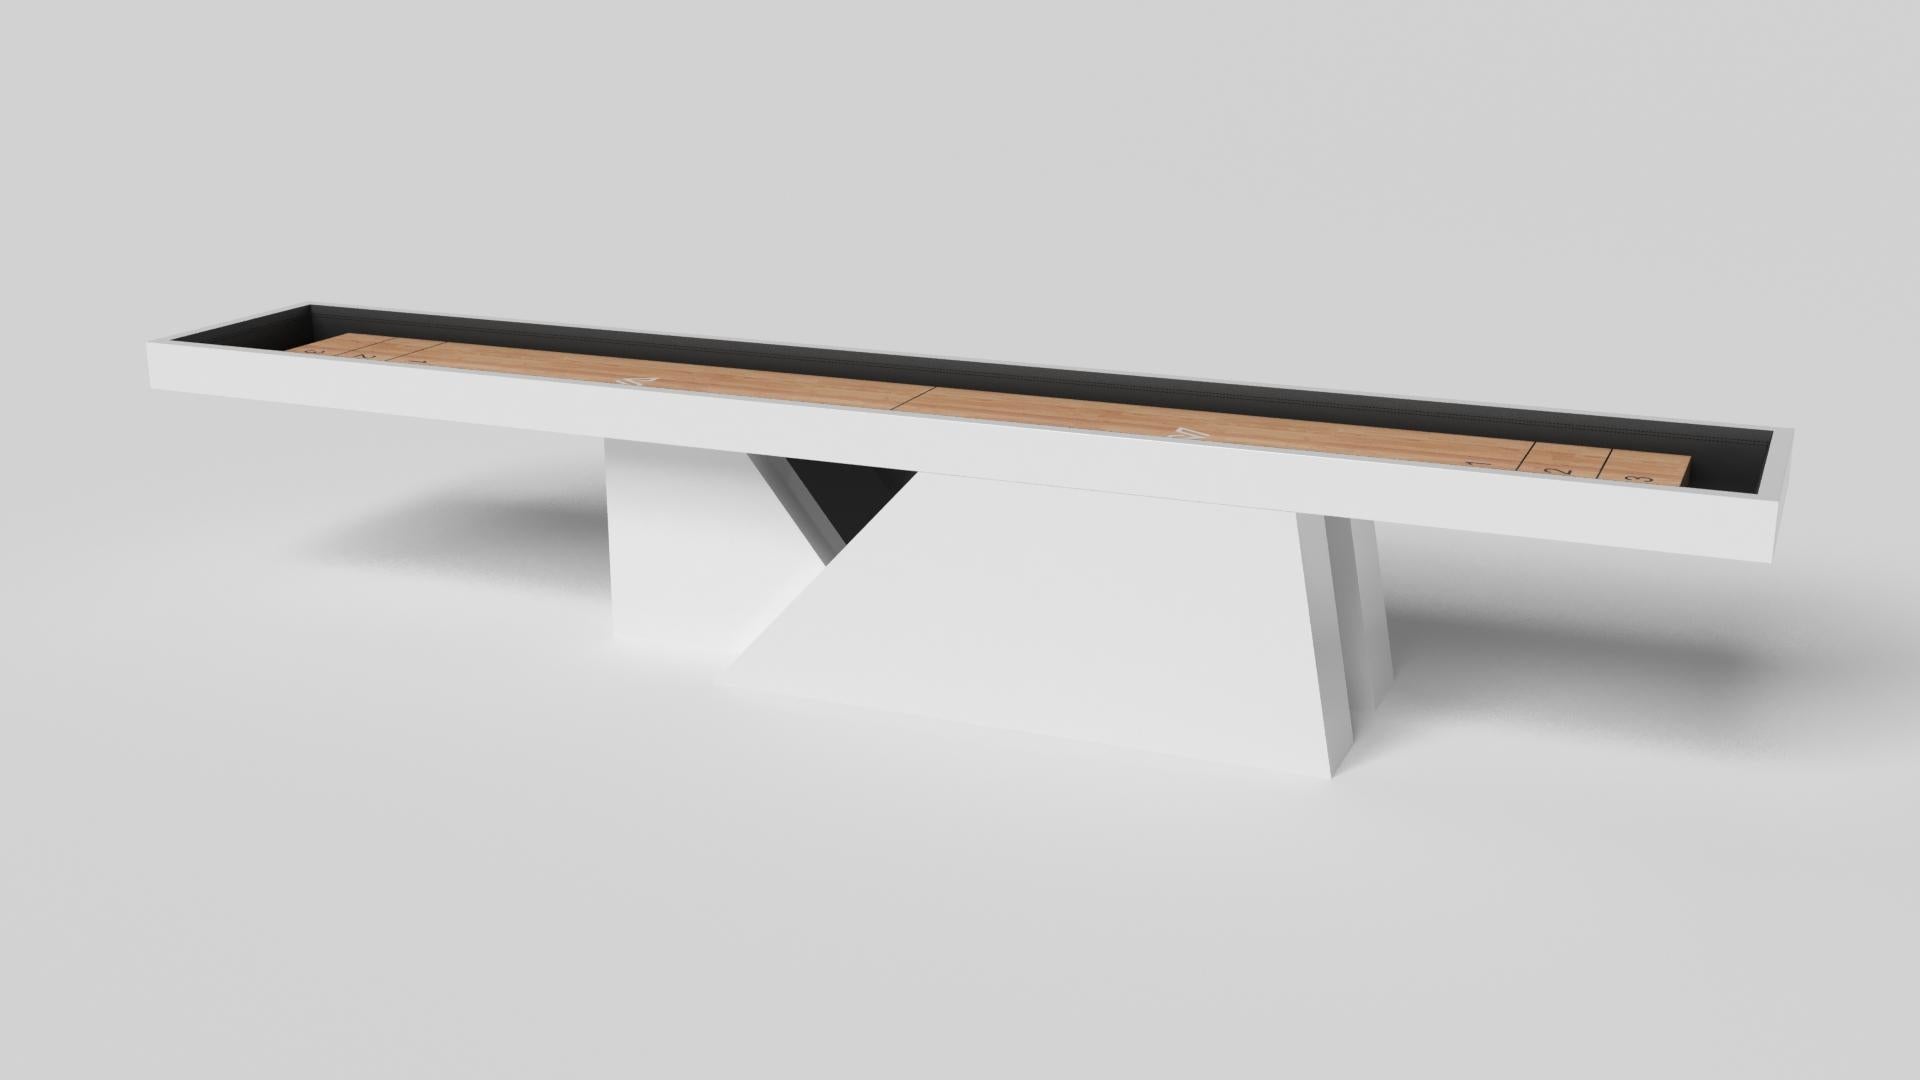 An asymmetric base creates a free-floating silhouette, making the Stilt shuffleboard table in chrome with walnut a compelling, contemporary addition to the modern home. Crafted from durable metal with solid walnut wood accents, this luxury